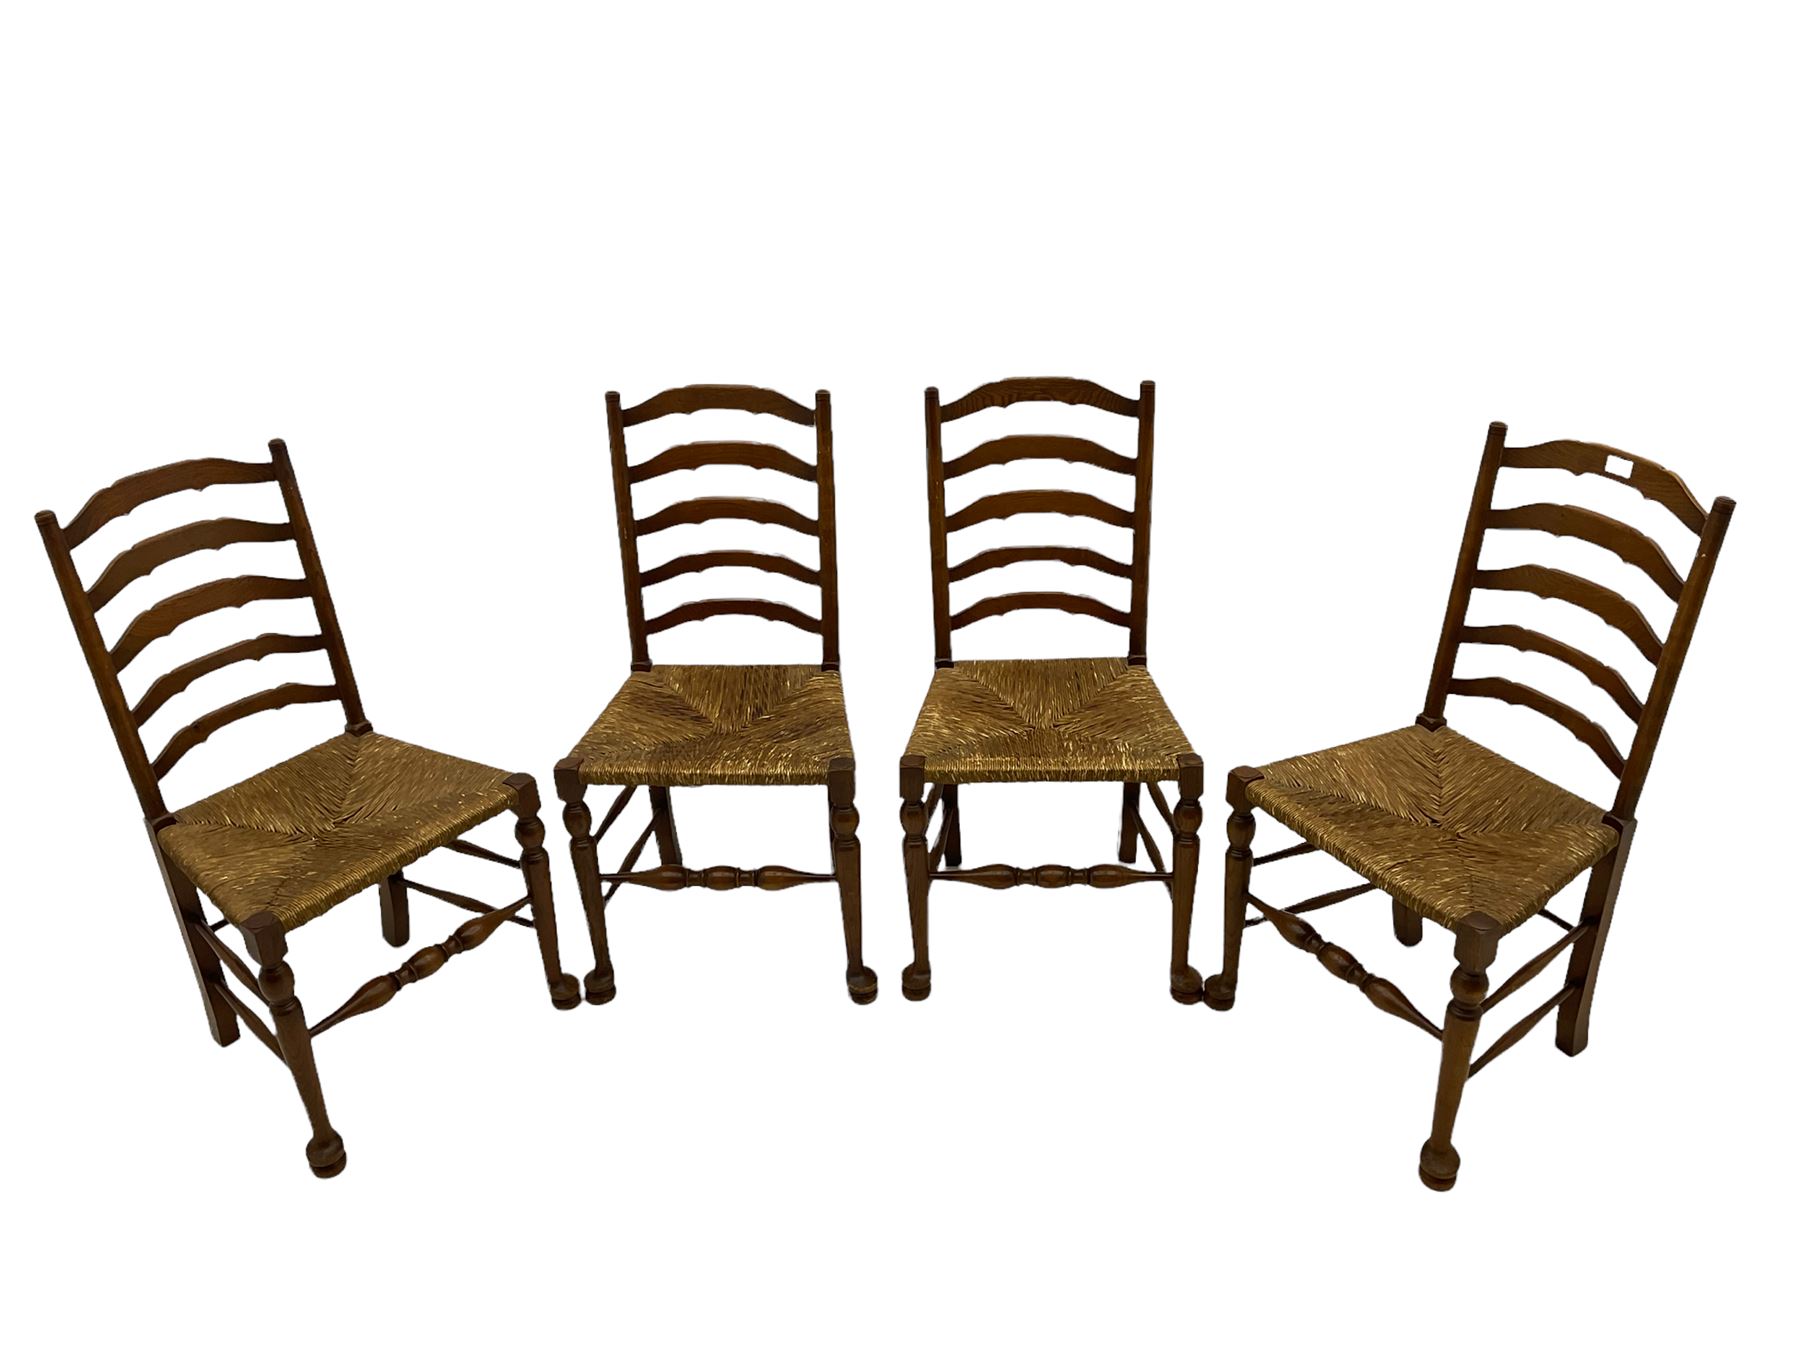 Four oak ladder back chairs with rush seats - Image 2 of 2